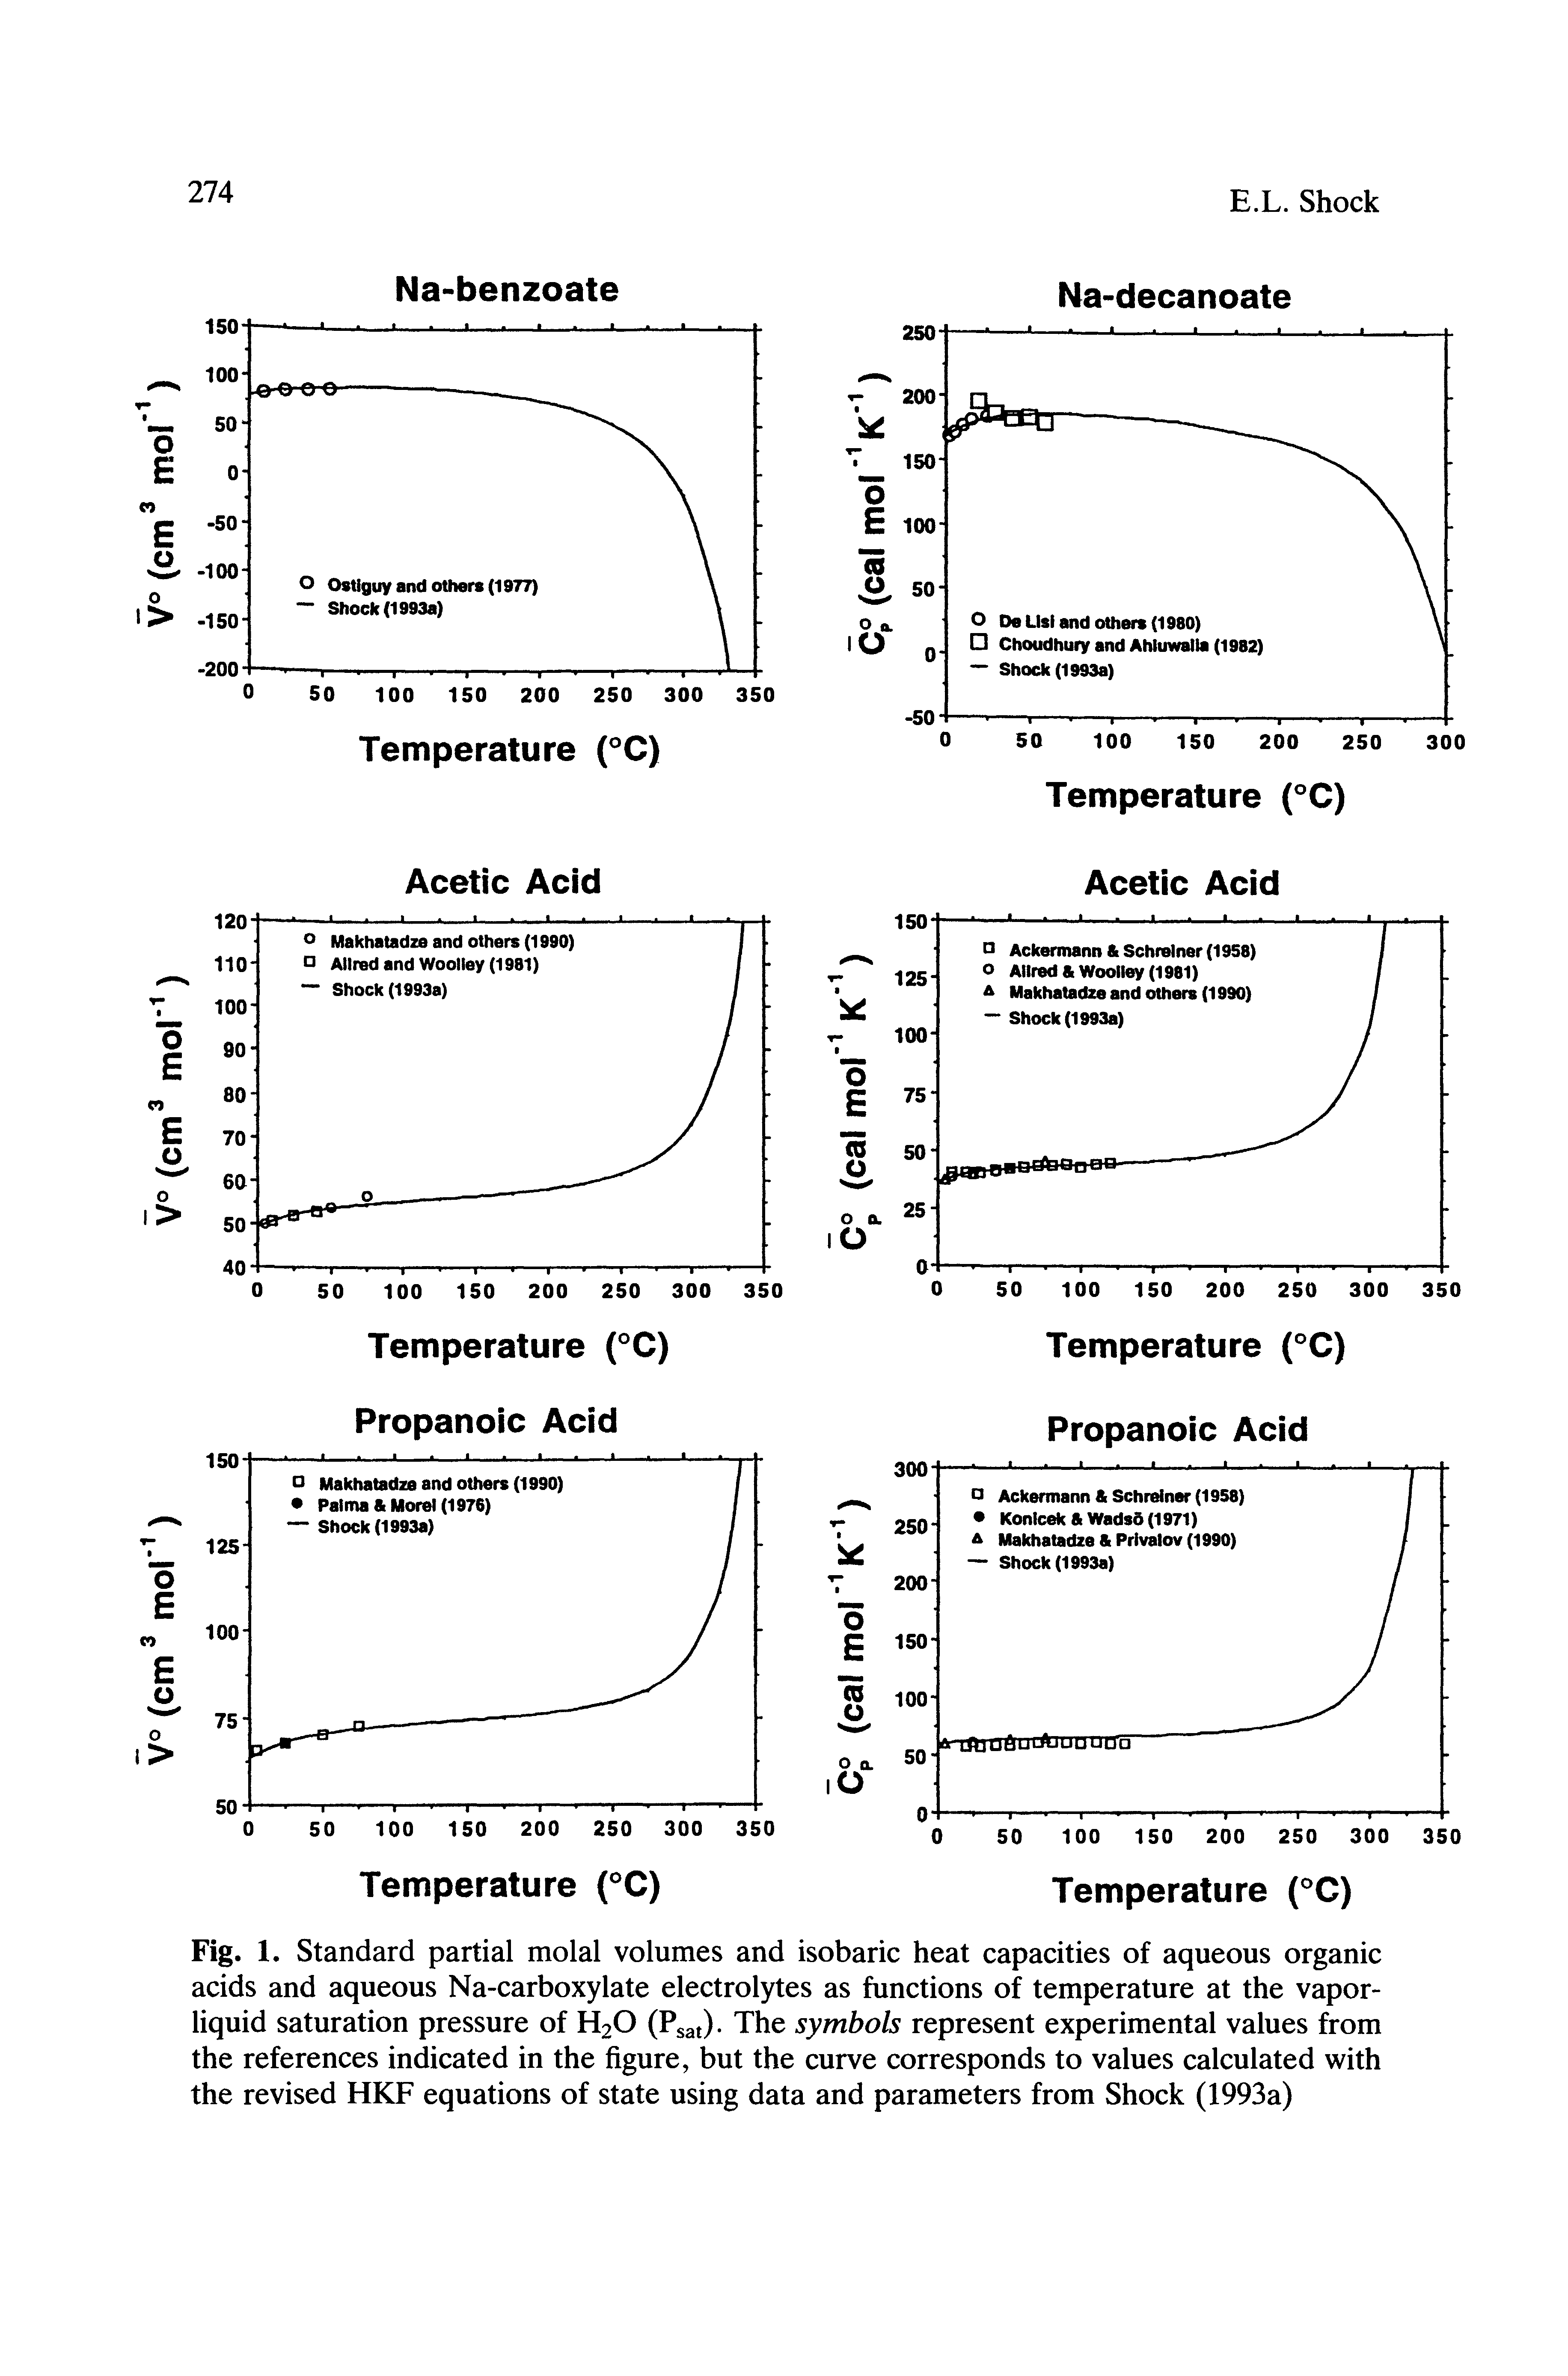 Fig. 1. Standard partial molal volumes and isobaric heat capacities of aqueous organic acids and aqueous Na-carboxylate electrolytes as functions of temperature at the vapor-liquid saturation pressure of H2O (Psat)- The symbols represent experimental values from the references indicated in the figure, but the curve corresponds to values calculated with the revised HKF equations of state using data and parameters from Shock (1993a)...